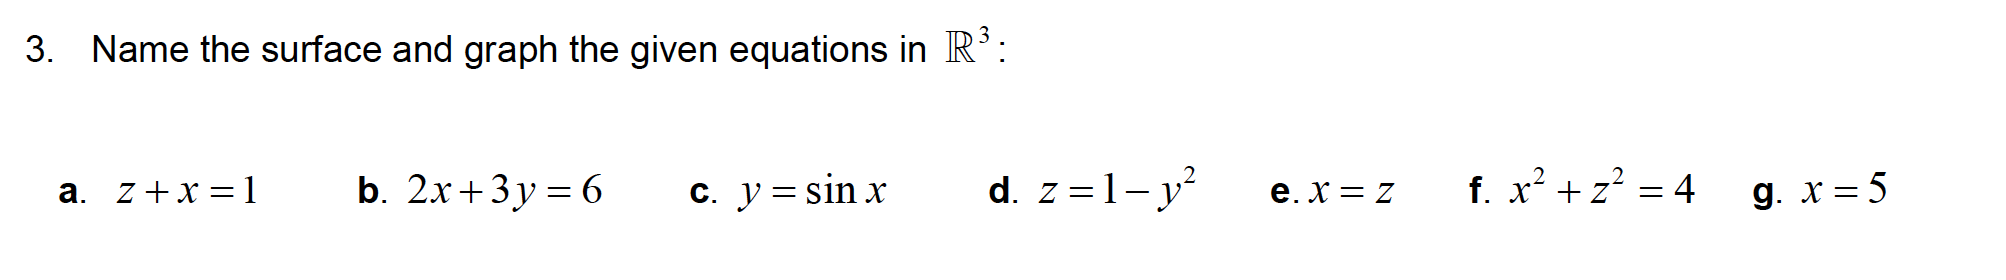 Name the surface and graph the given equations in R’:
. z+x = 1
b. 2x+3y = 6
с. у%3Dsin x
d. z =1- y
e. X = z
f. x² +z? = 4
g. x = 5
